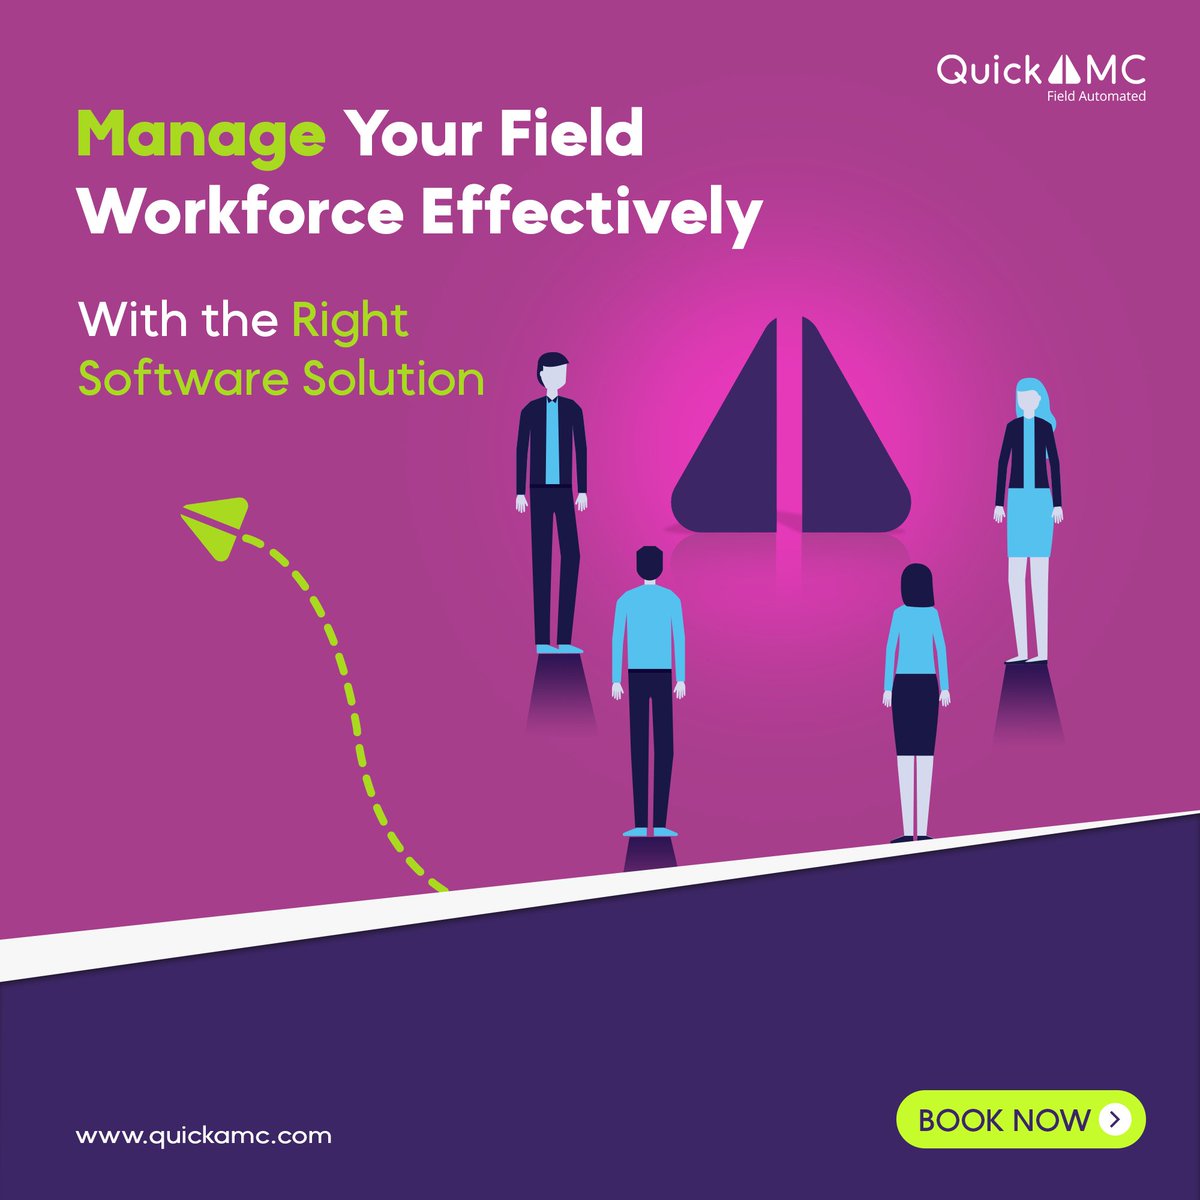 Are you struggling to streamline and manage your field workforce effectively?

#quickamc #amc #workflow #management #streamline #technology #tech #business #automate #software #iot #fieldautomation #work #fieldserviceengineer #softwaredeveloper #productivity #optimize #tech